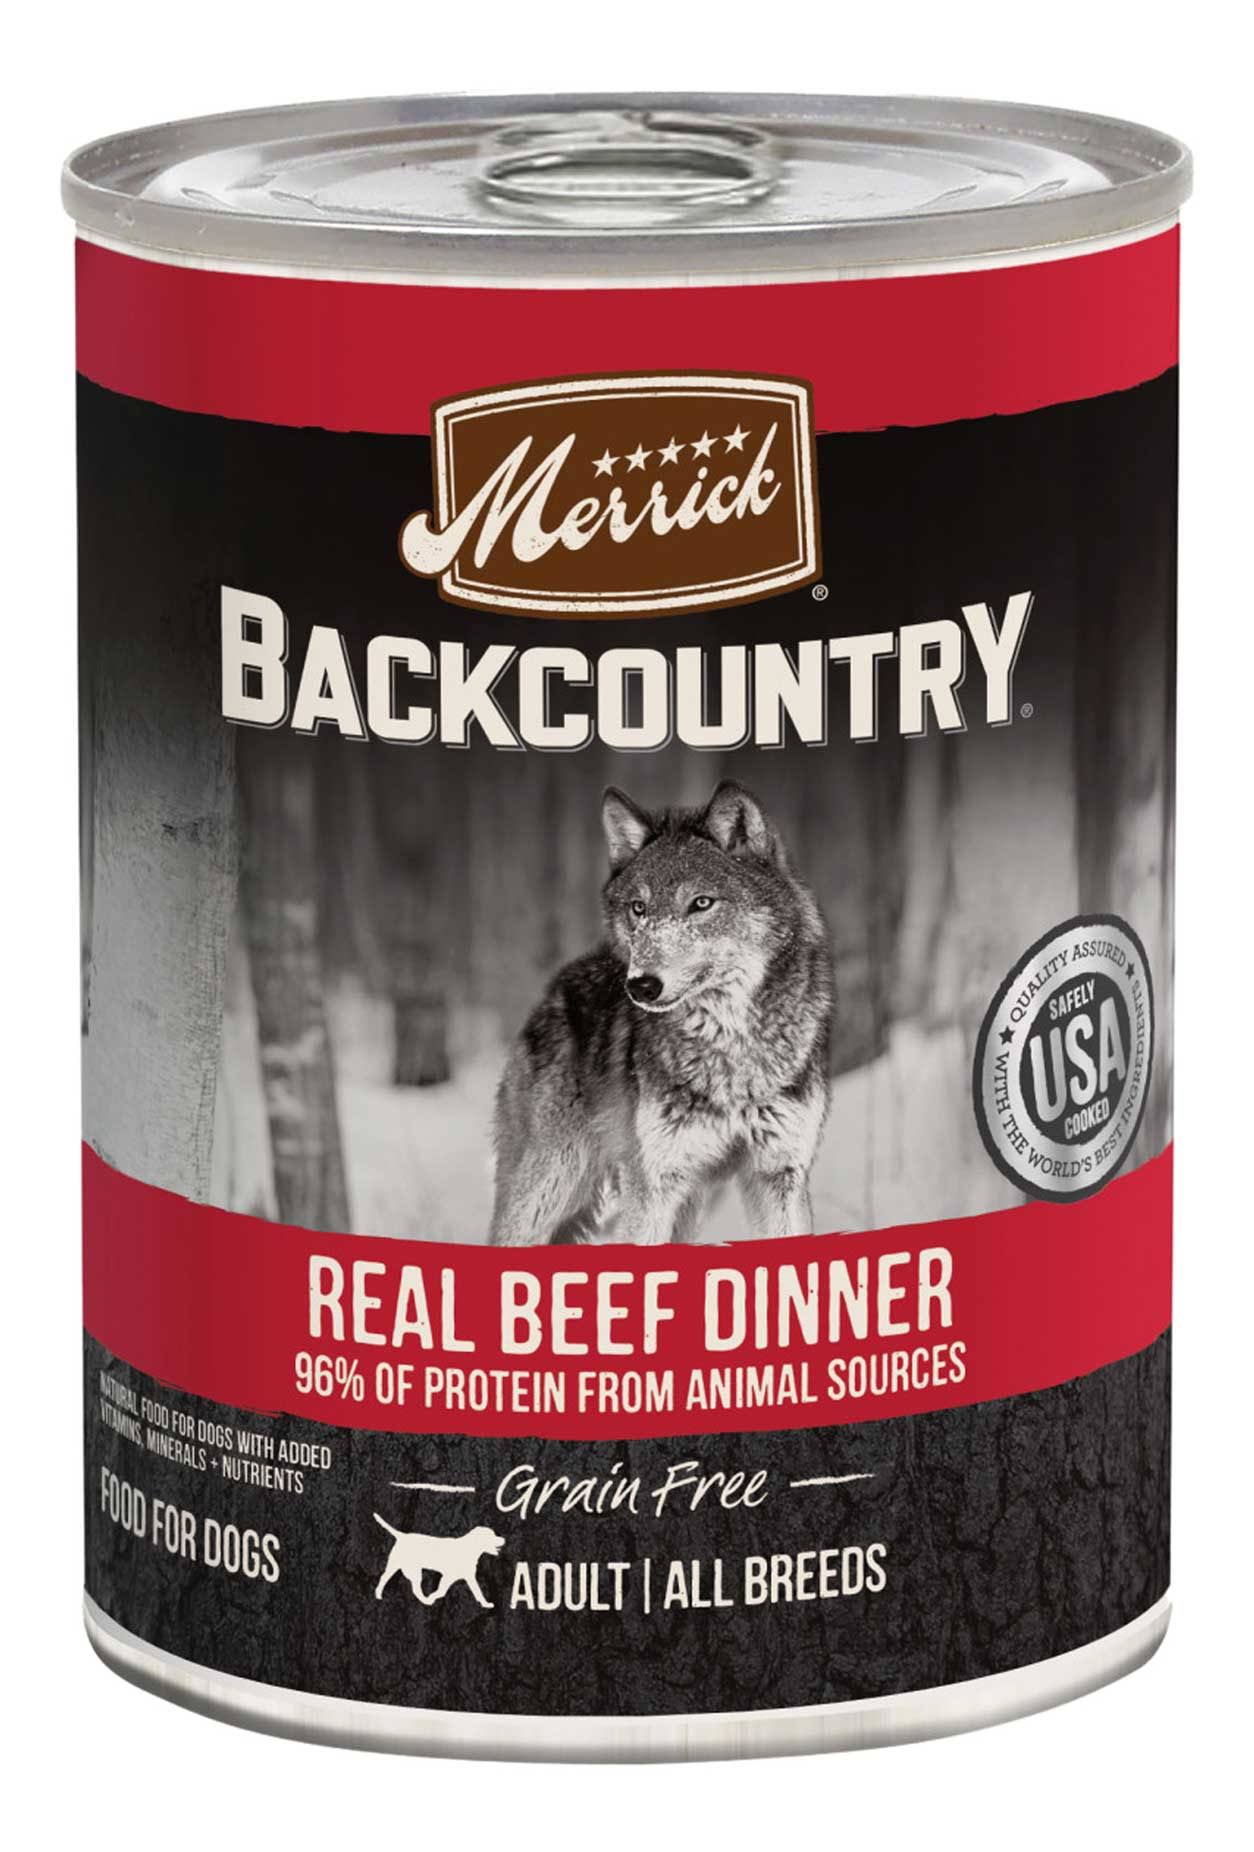 Merrick Backcountry Grain Free 96 Percent Real Beef - 12.7 Oz, 12 Count